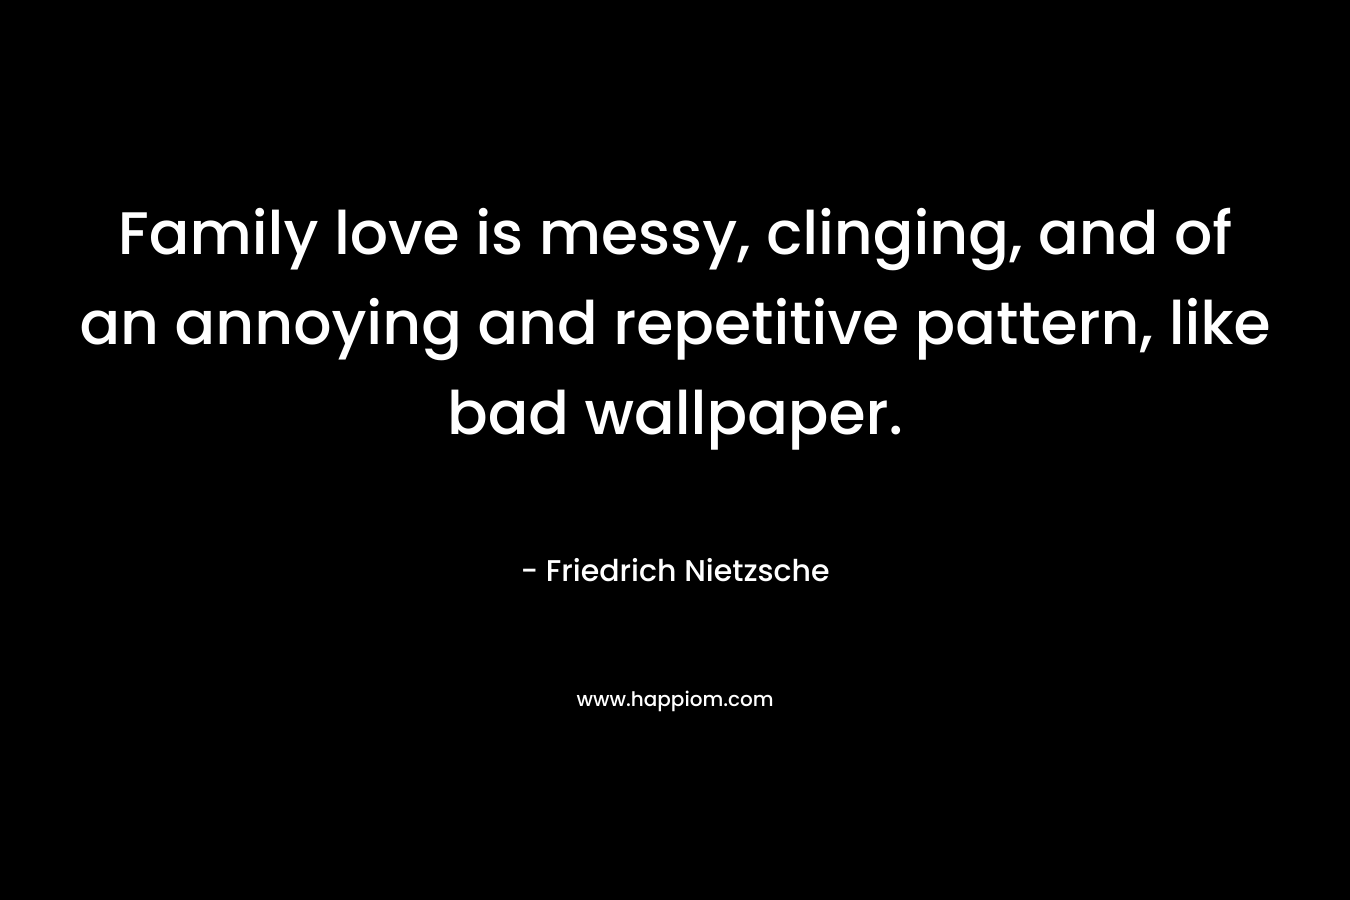 Family love is messy, clinging, and of an annoying and repetitive pattern, like bad wallpaper.